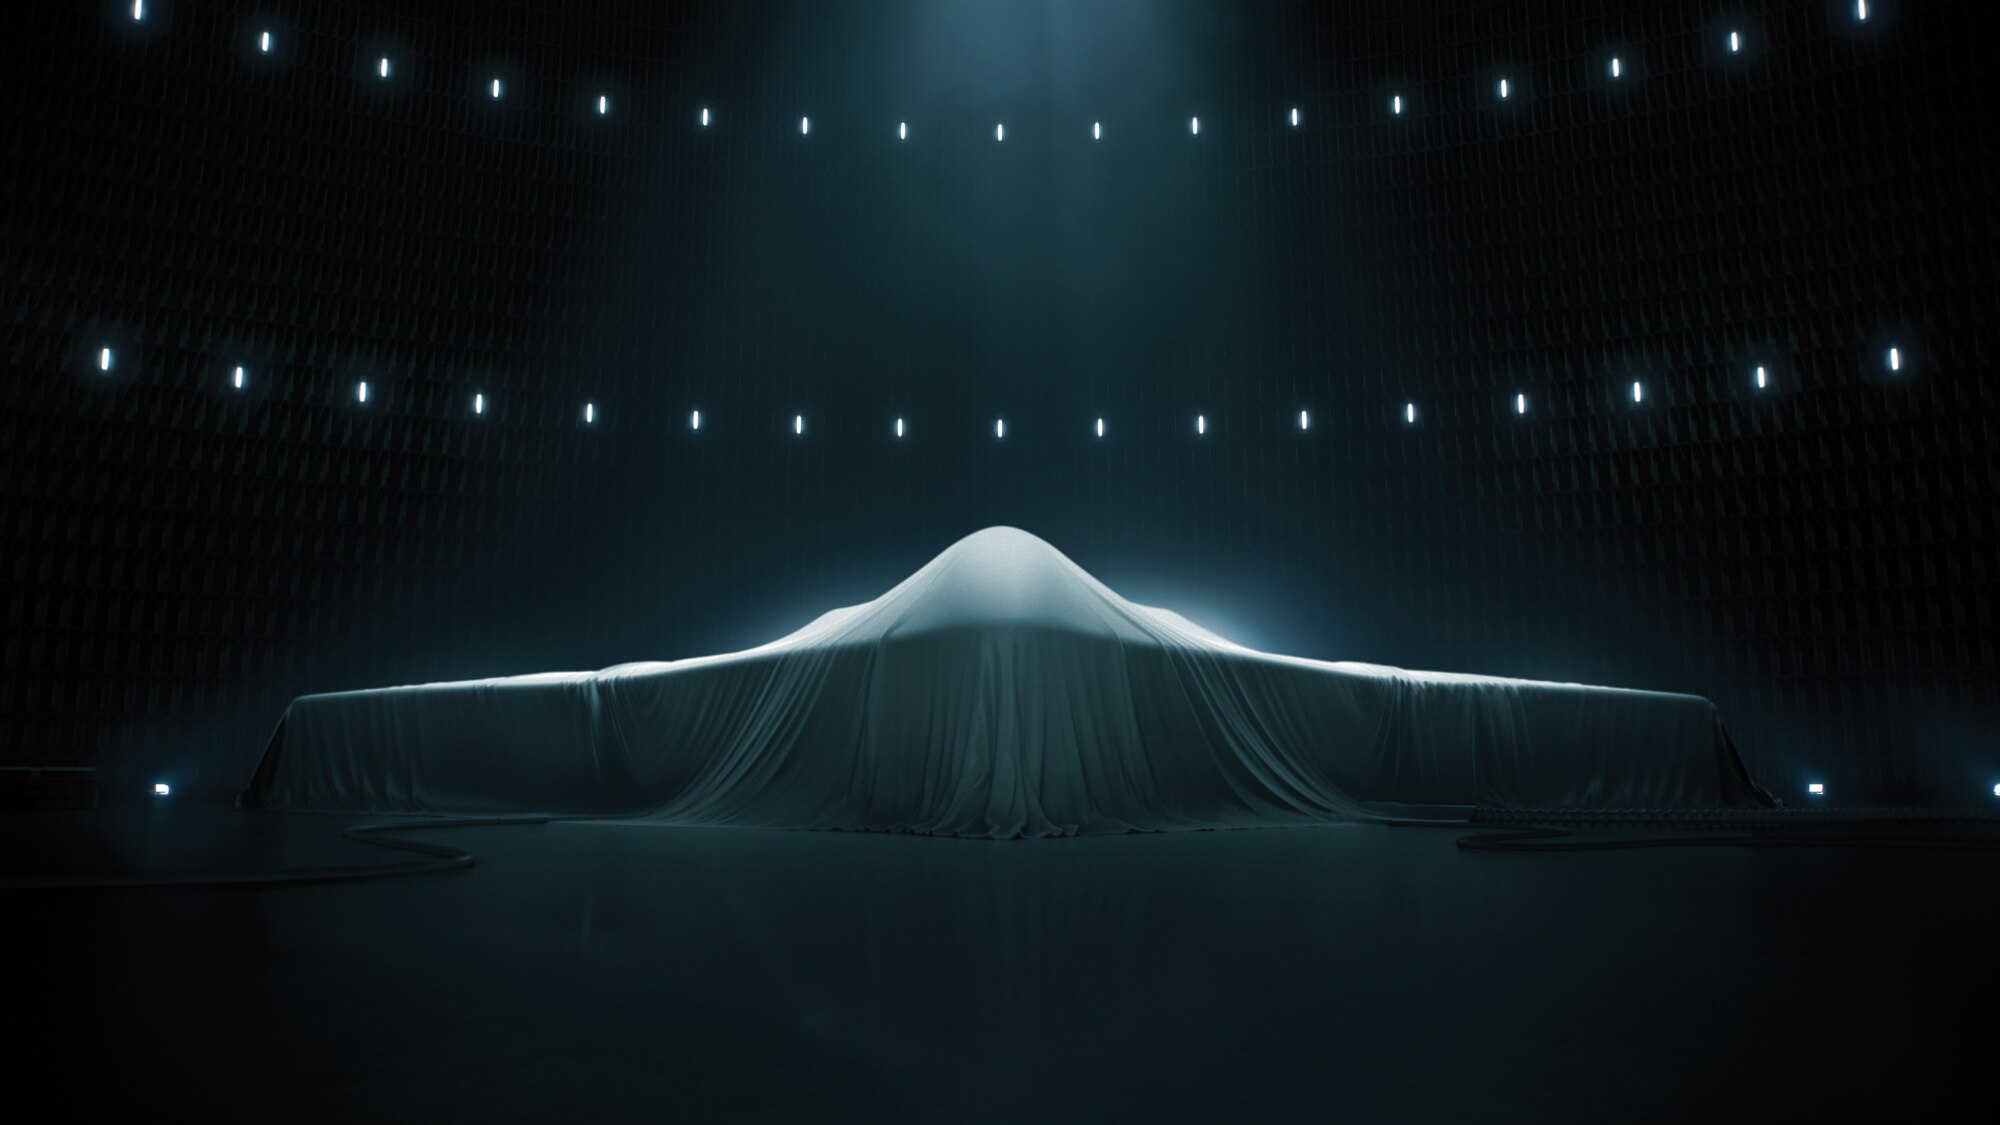 The B-21 is a long-range, highly survivable, penetrating strike stealth bomber that will incrementally replace the B-1 and B-2 bombers, becoming the backbone of the U.S. Air Force bomber fleet.